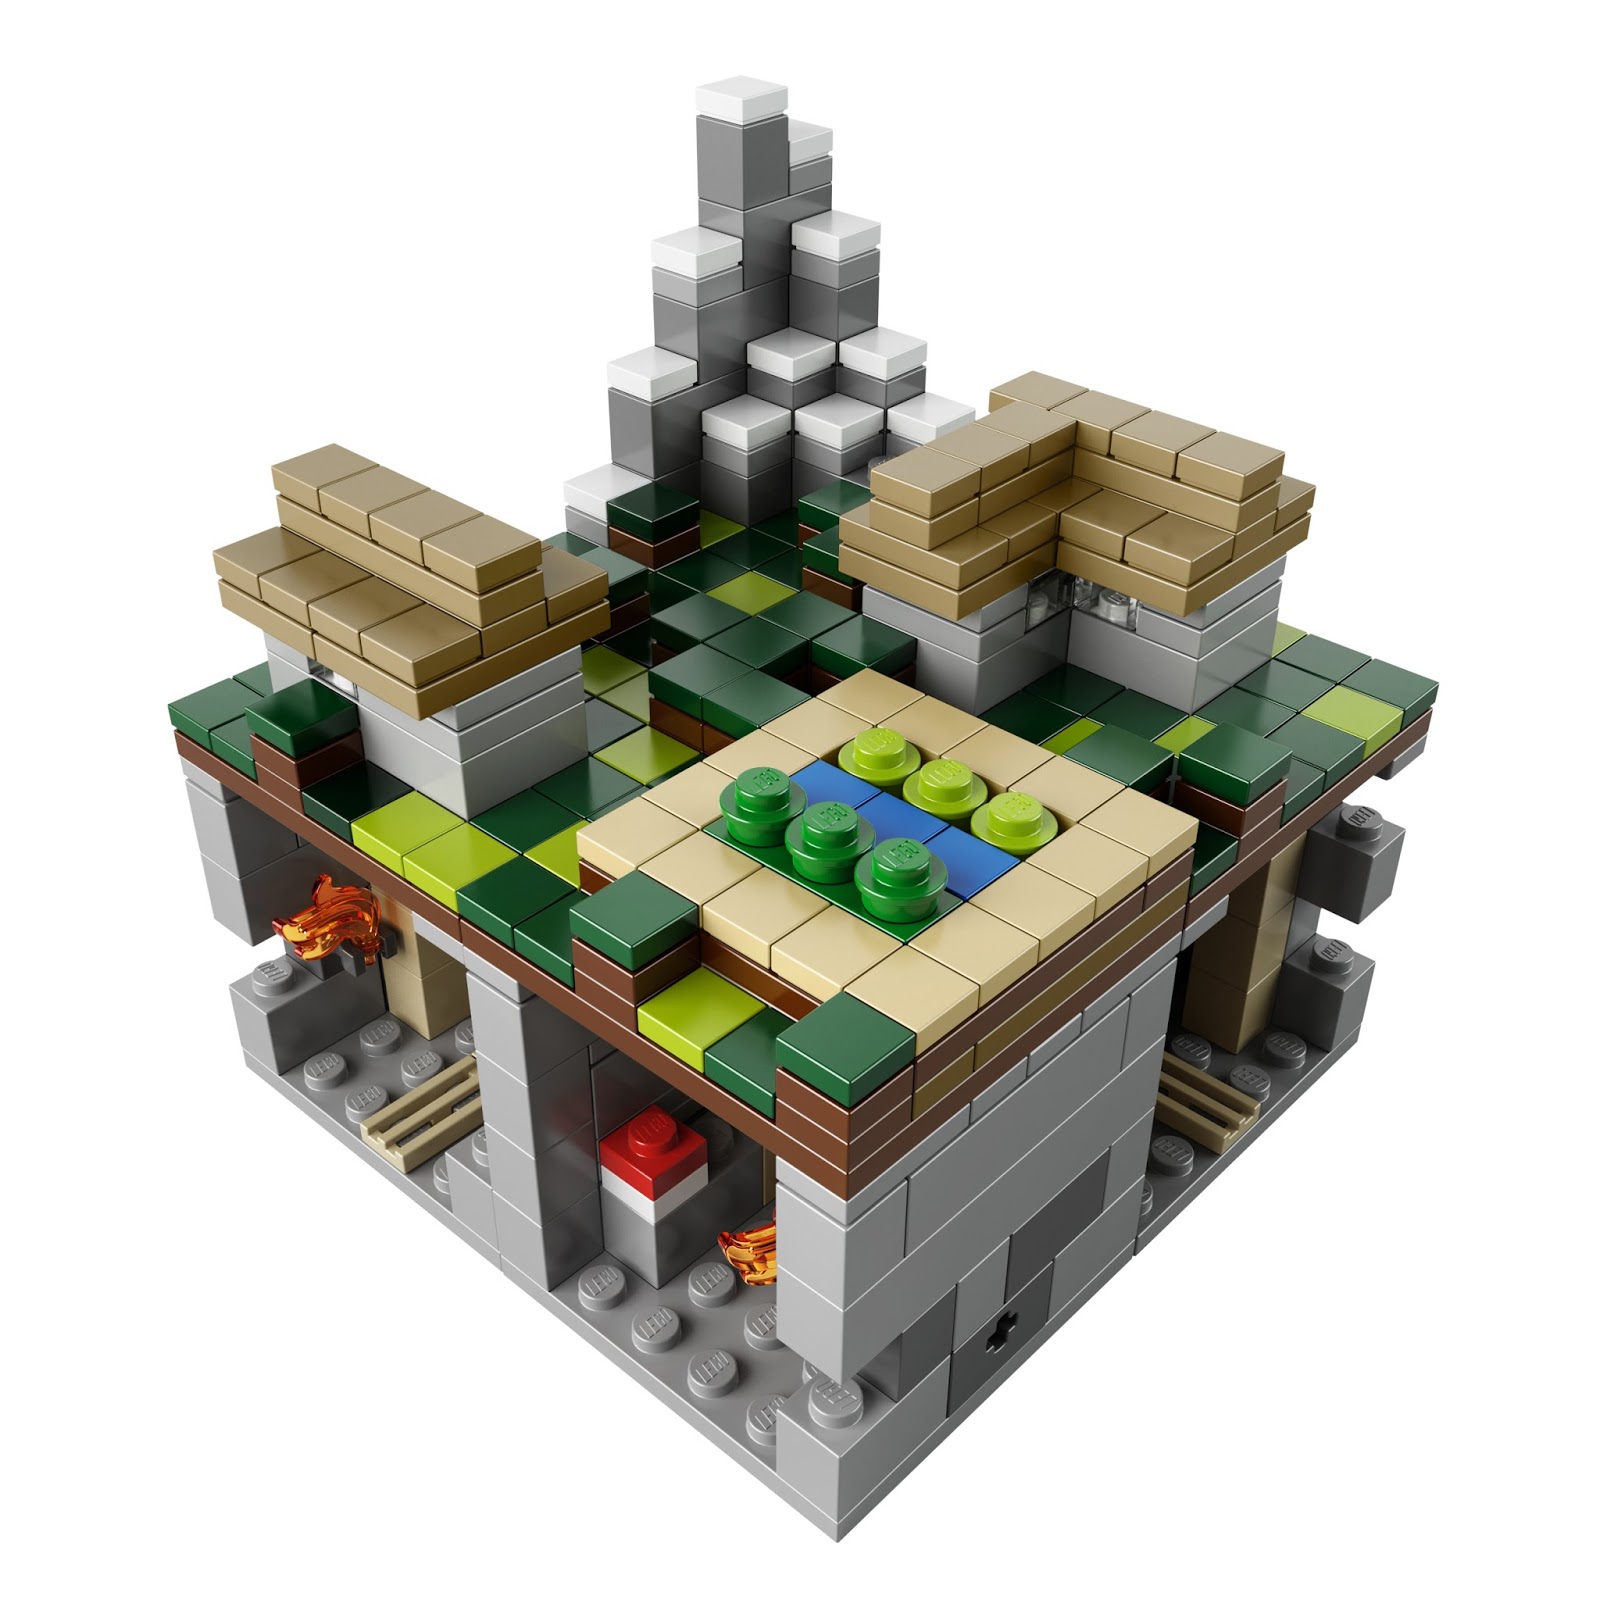 The Brickverse: Official images of the new Minecraft sets